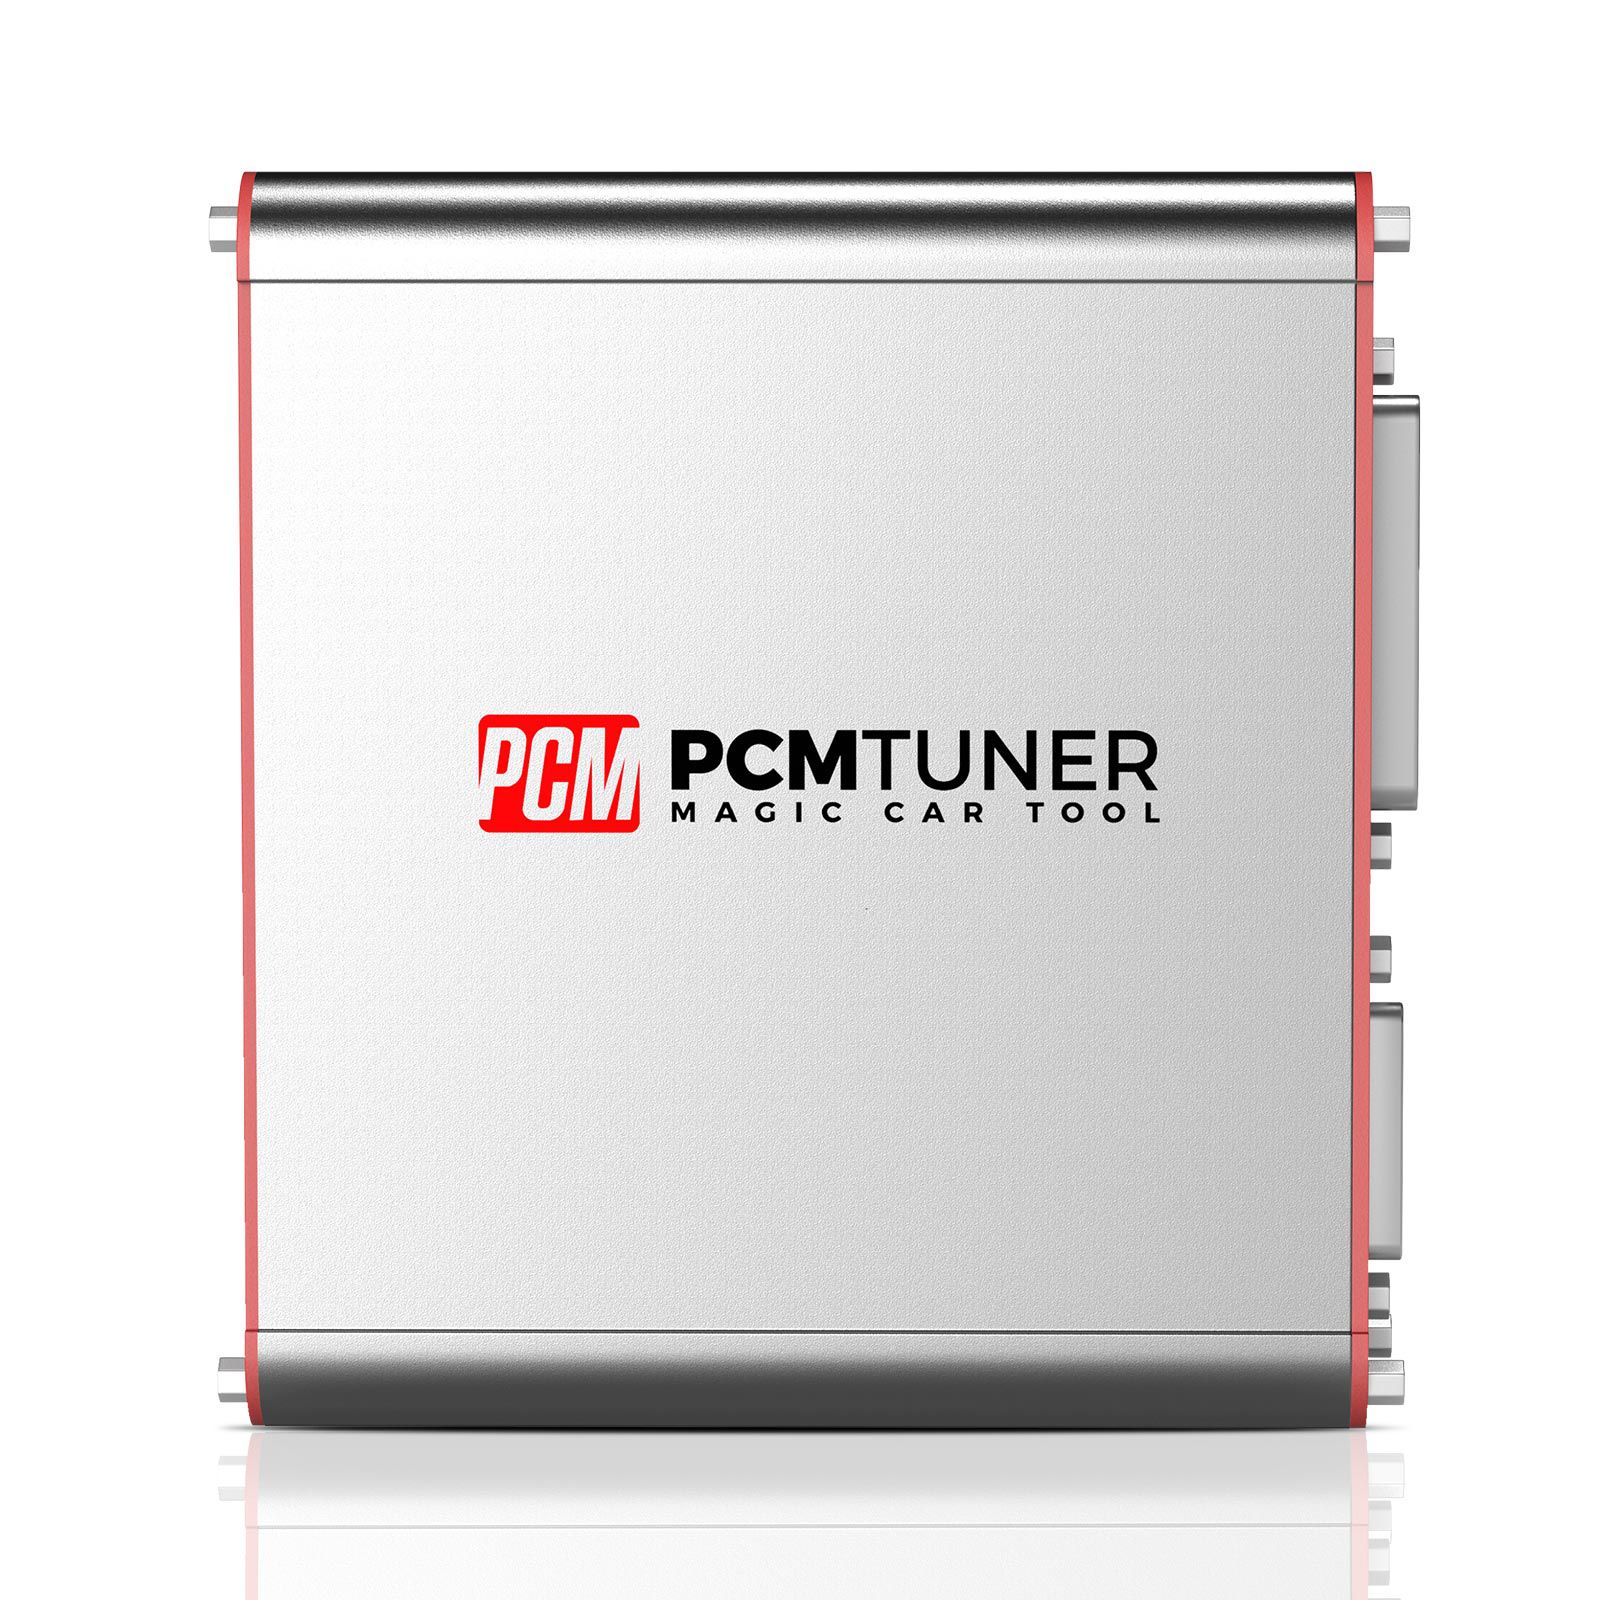 V1.27 PCMtuner ECU Programmer with 67 Modules Free Online Update Support Checksum Pinout Diagram with Free Damaos for Users Get Free Silicone Case